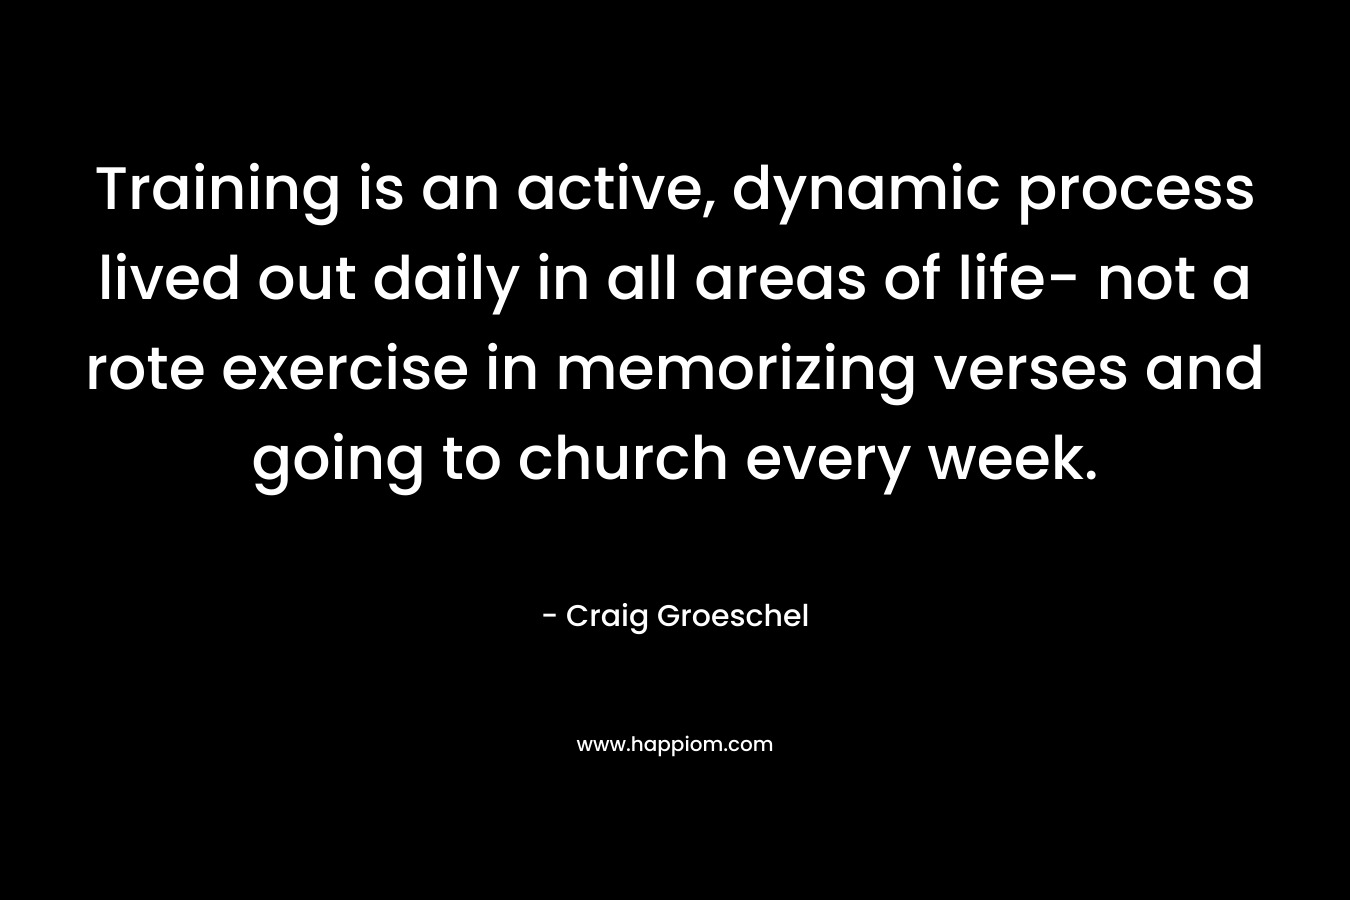 Training is an active, dynamic process lived out daily in all areas of life- not a rote exercise in memorizing verses and going to church every week. – Craig Groeschel